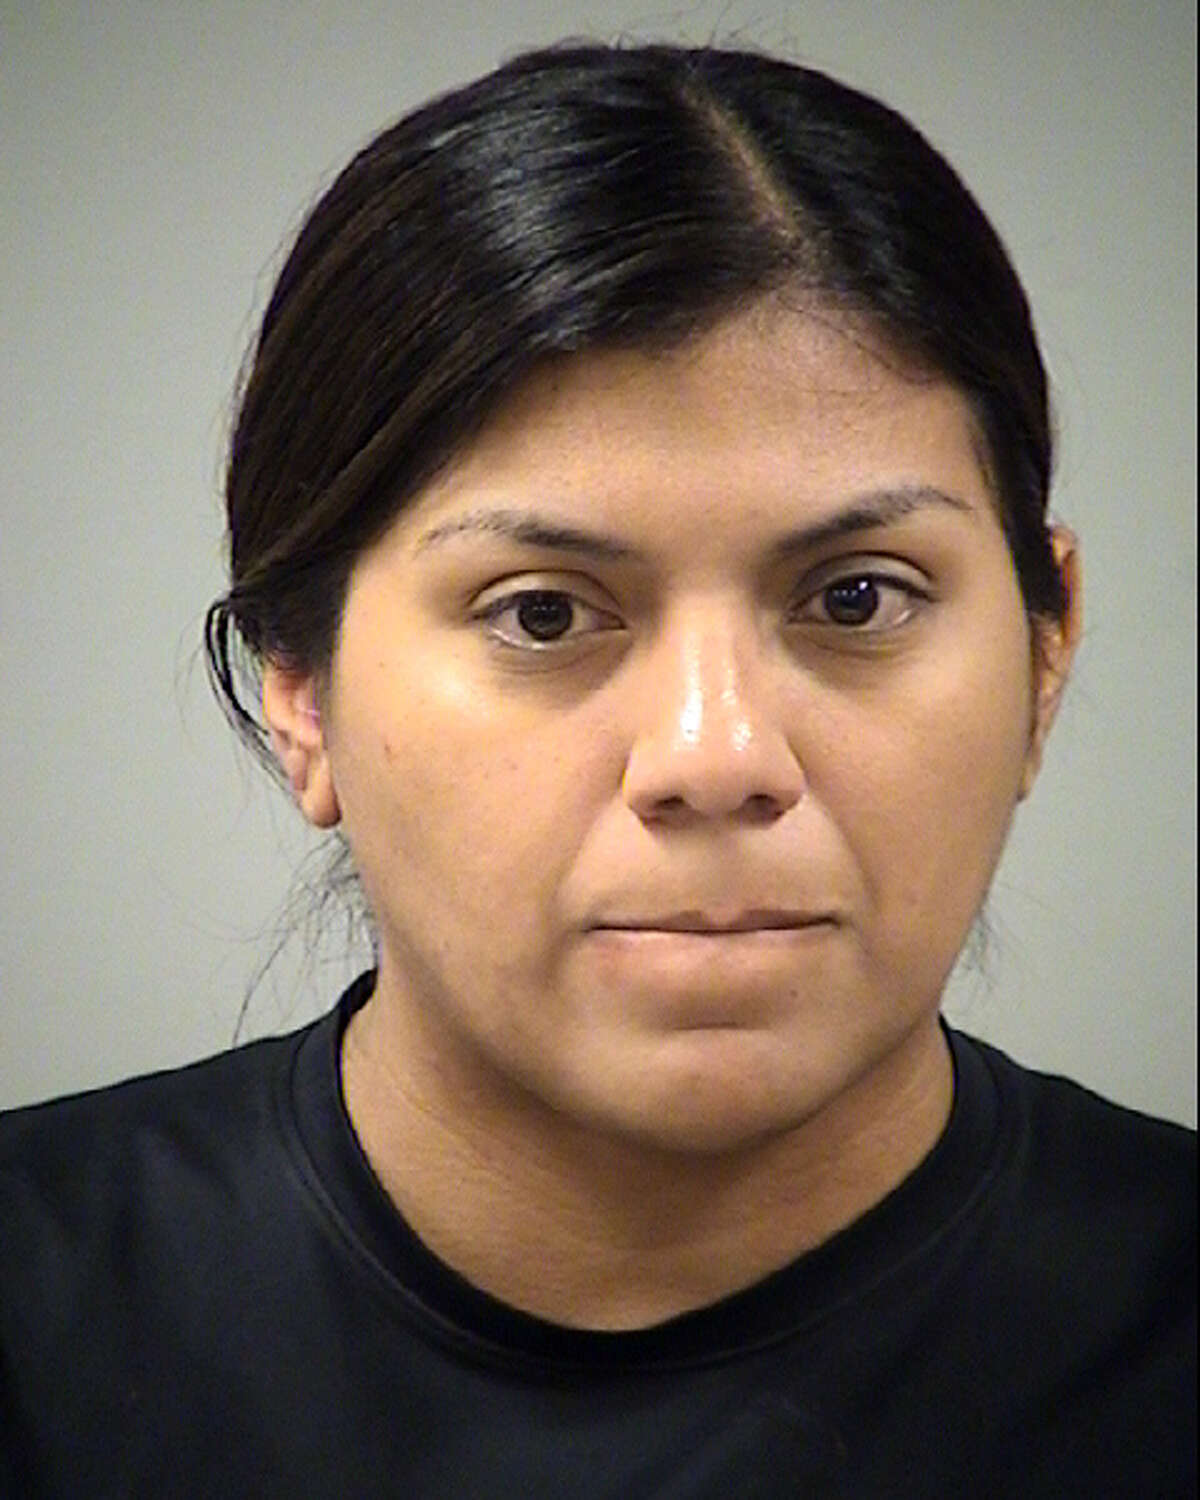 Rita Alvarez, 31, faces charges of engaging in organized criminal activity and illegal bartering. She remains in the Bexar County Jail on a $50,000 bond.